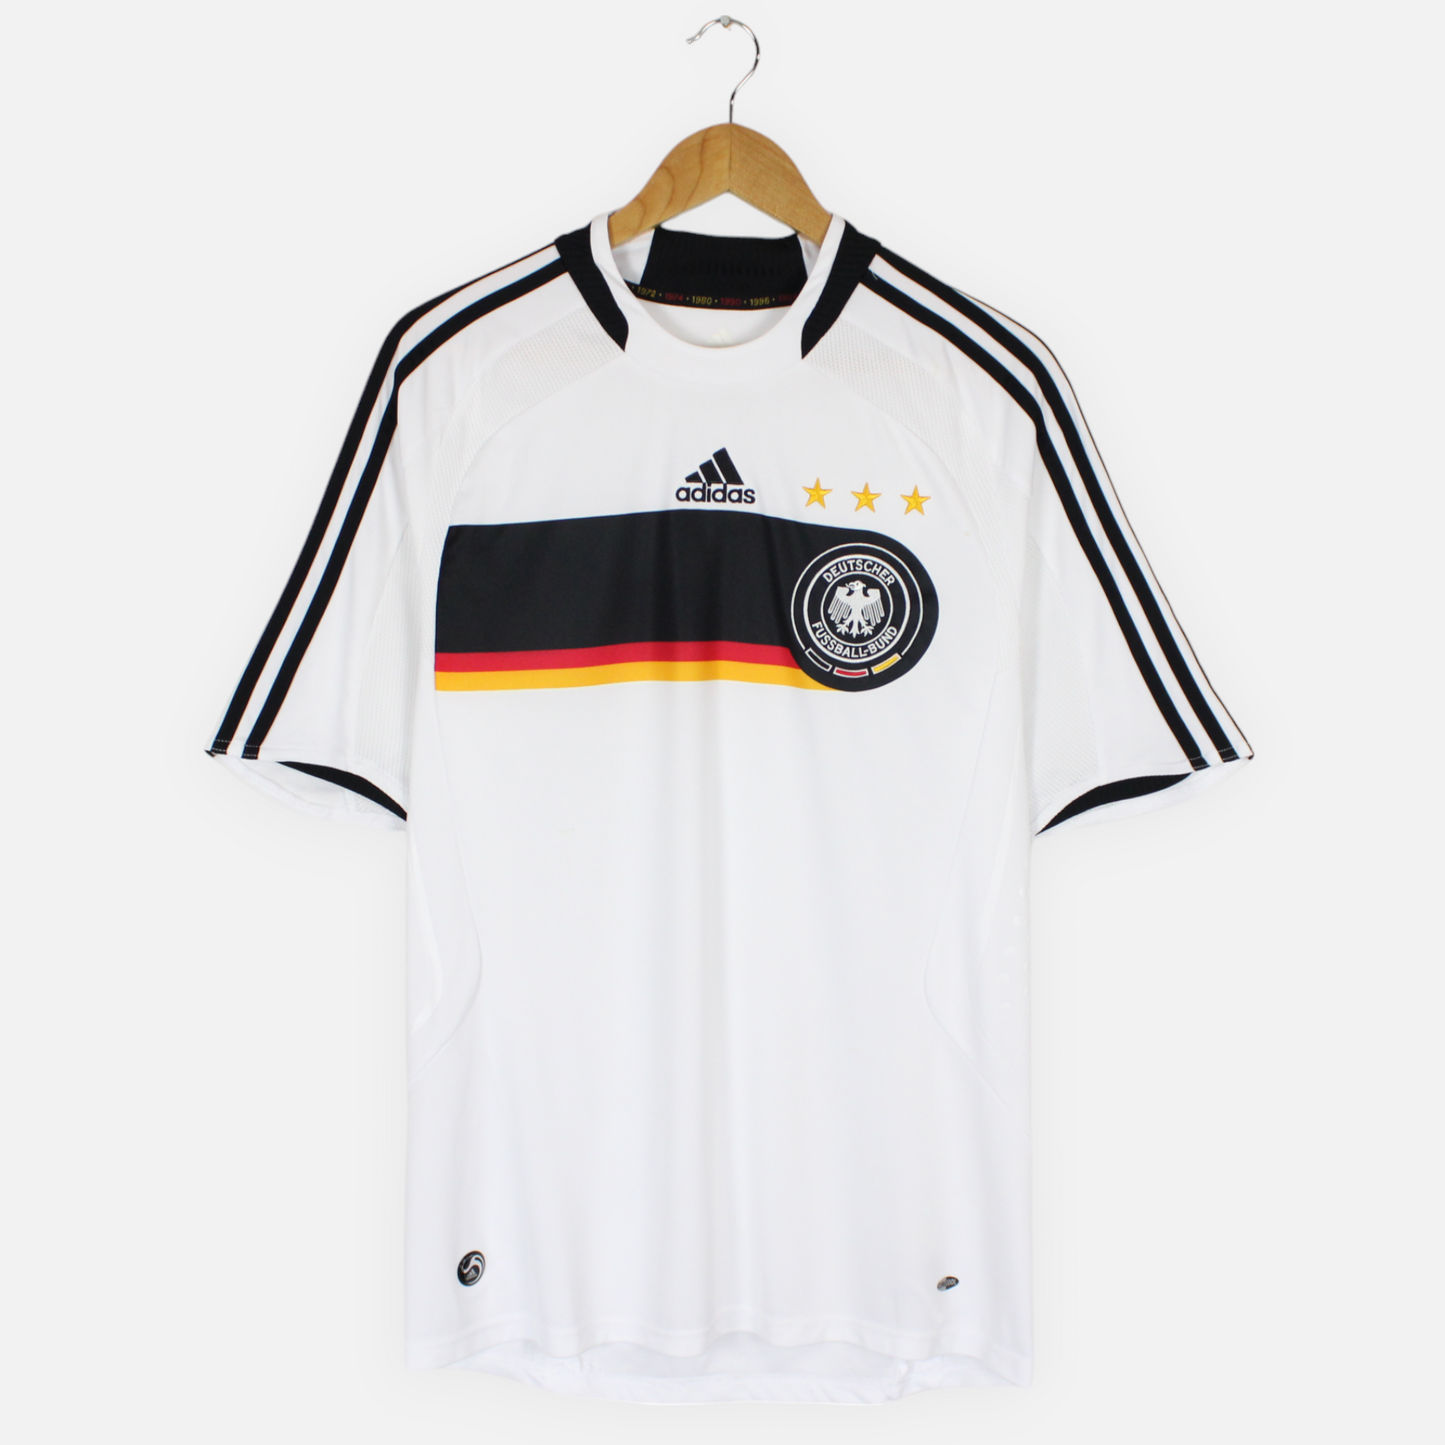 Germany 2008/09 Home Adidas Jersey - M